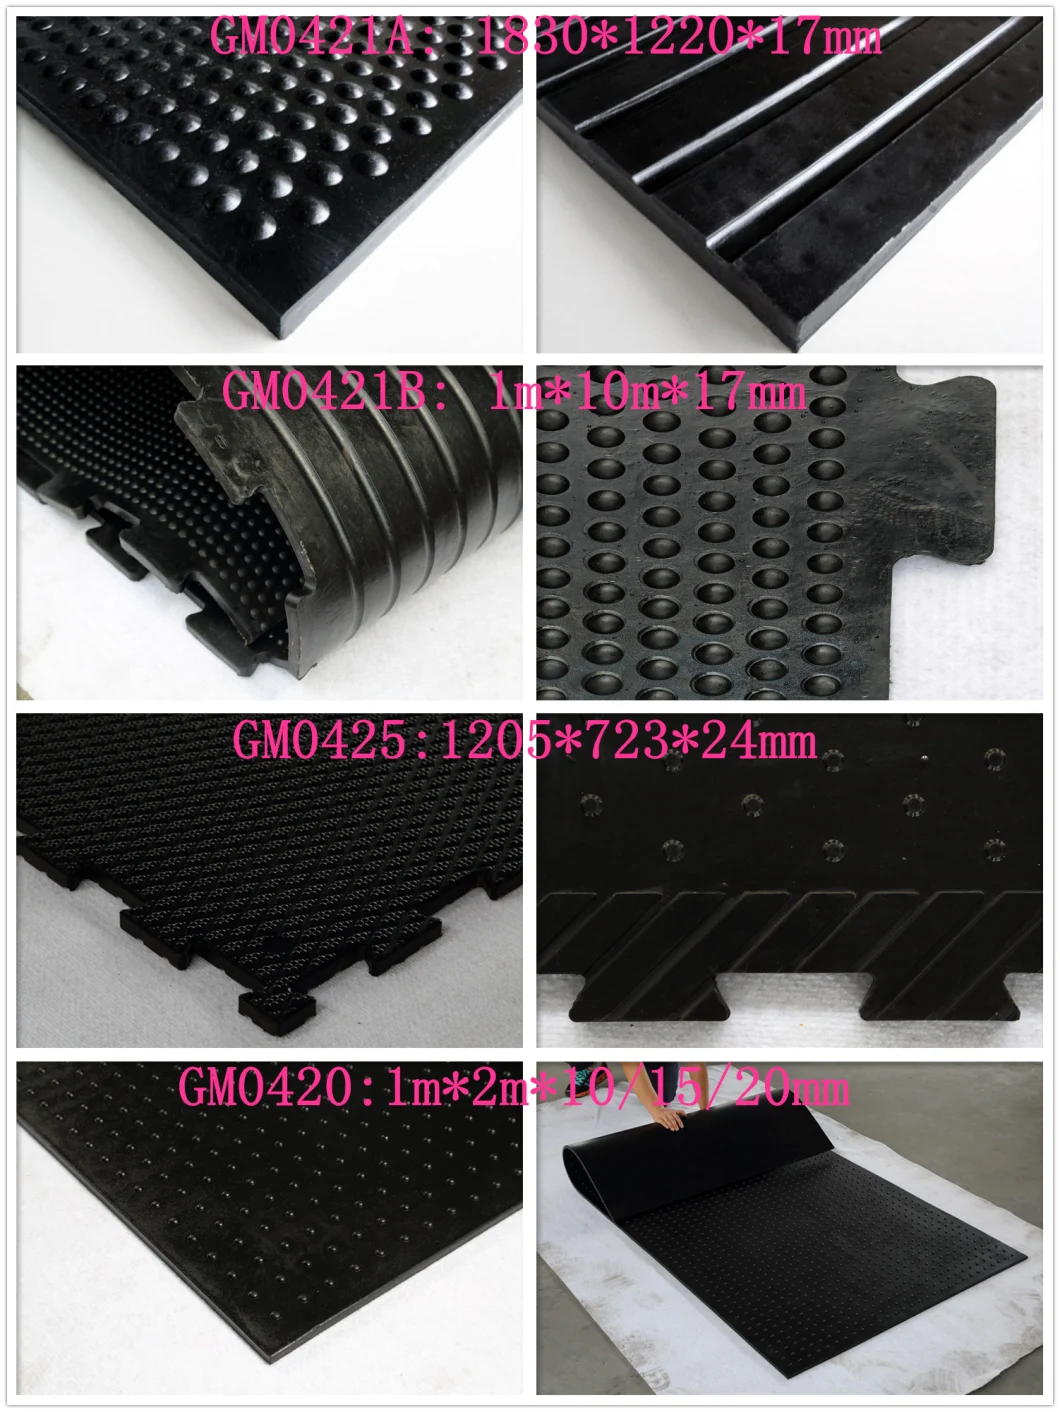 New Bubble Top 17mm 6X4 Rubber Stable Mats Nationwide